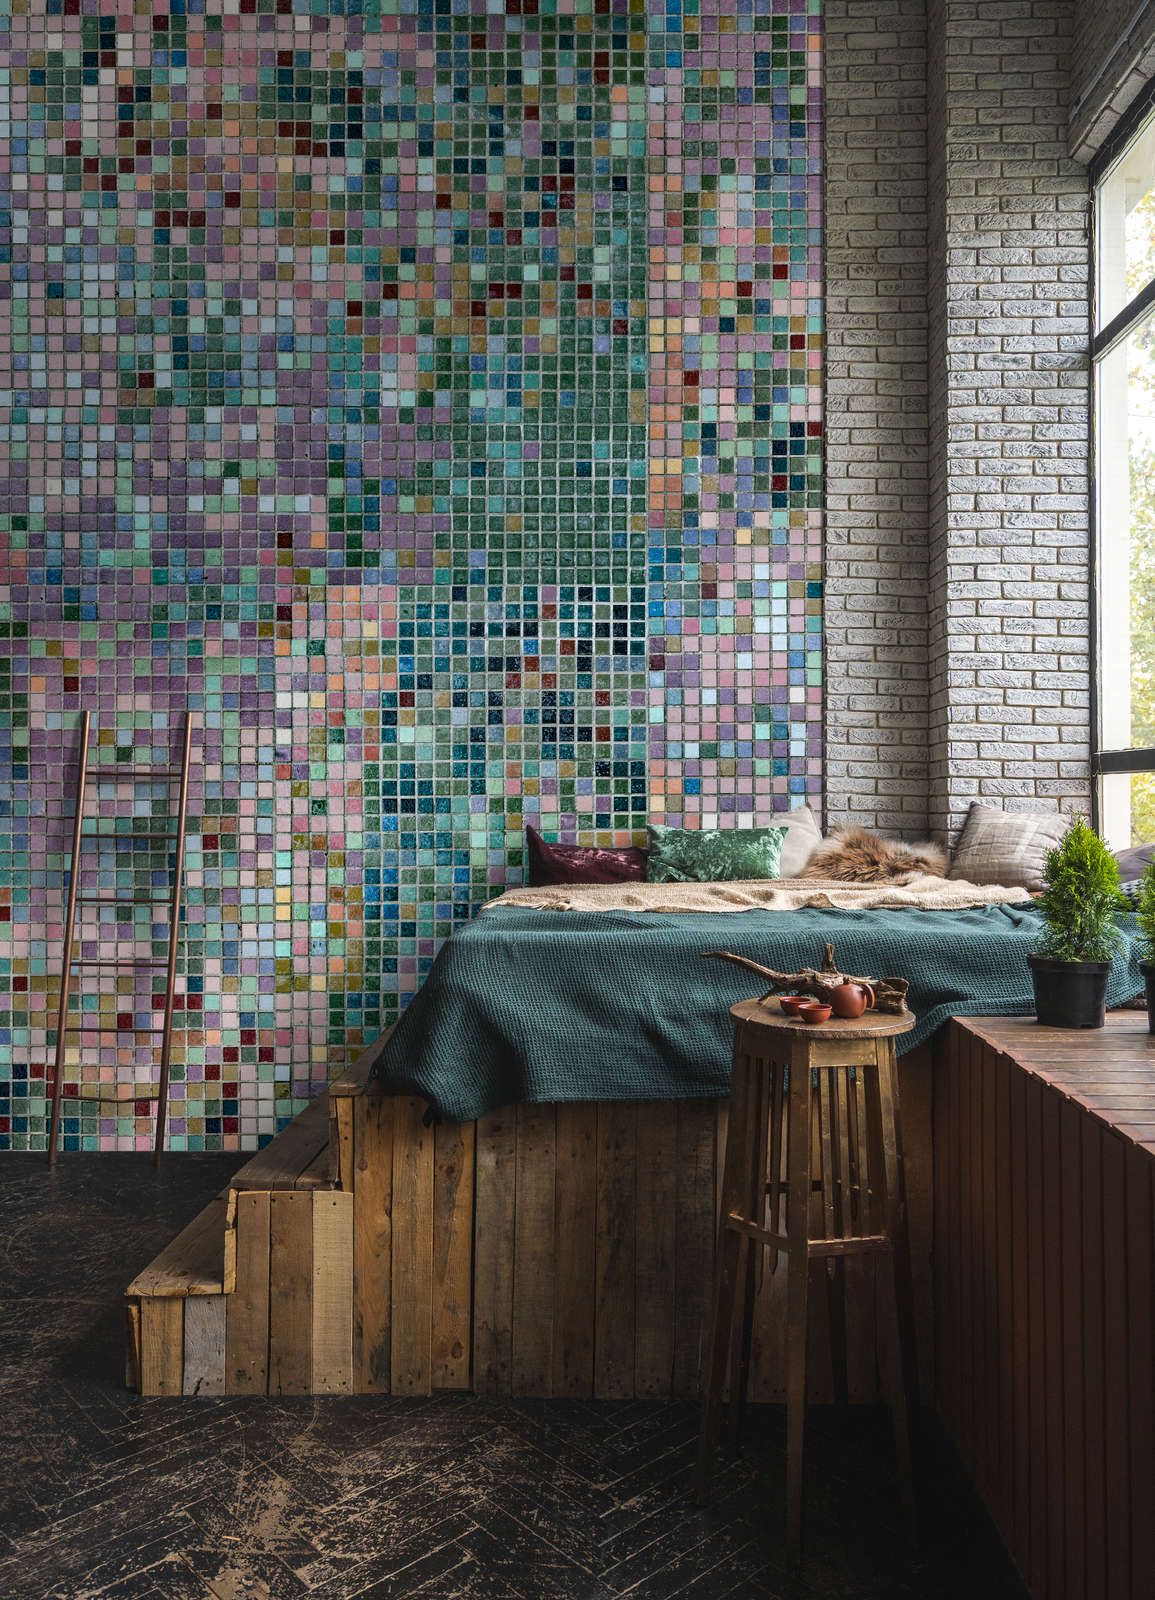             Photo wallpaper »grand central« - Mosaic pattern in bright colours - Smooth, slightly shiny premium non-woven fabric
        